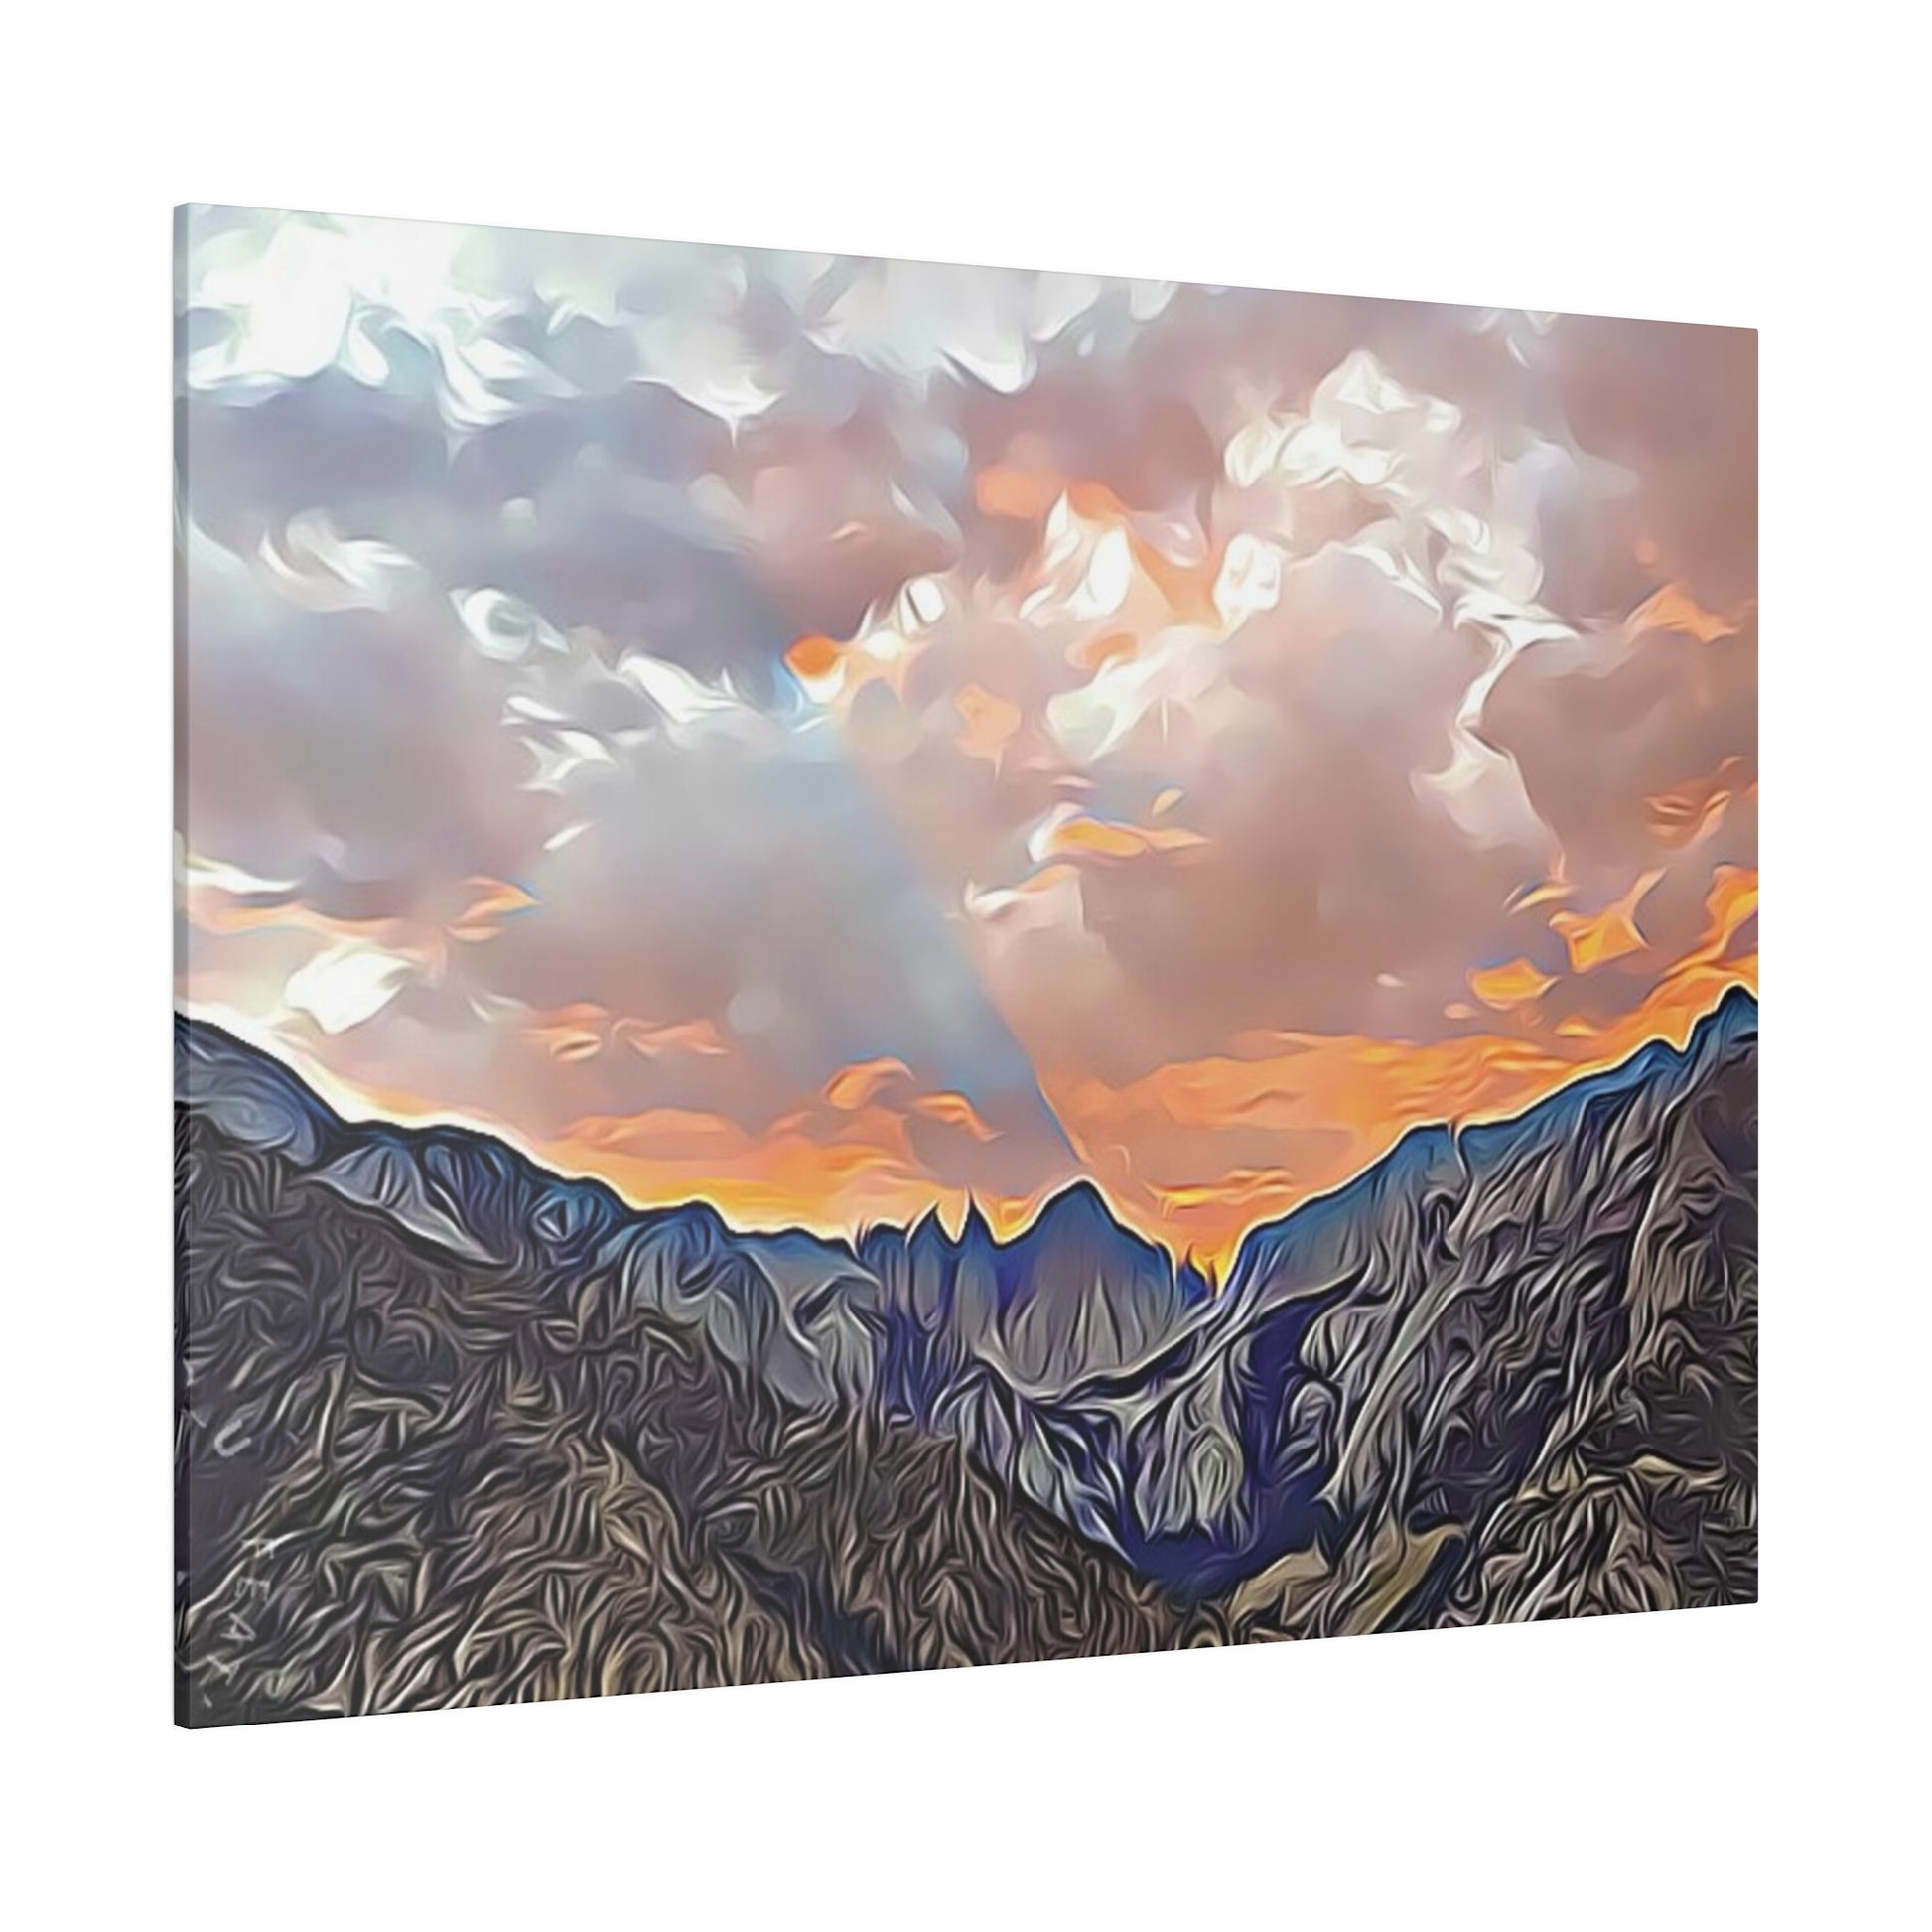 Sunset Serenity: California's Mount Whitney Captured in Canvas Art - Shades Array